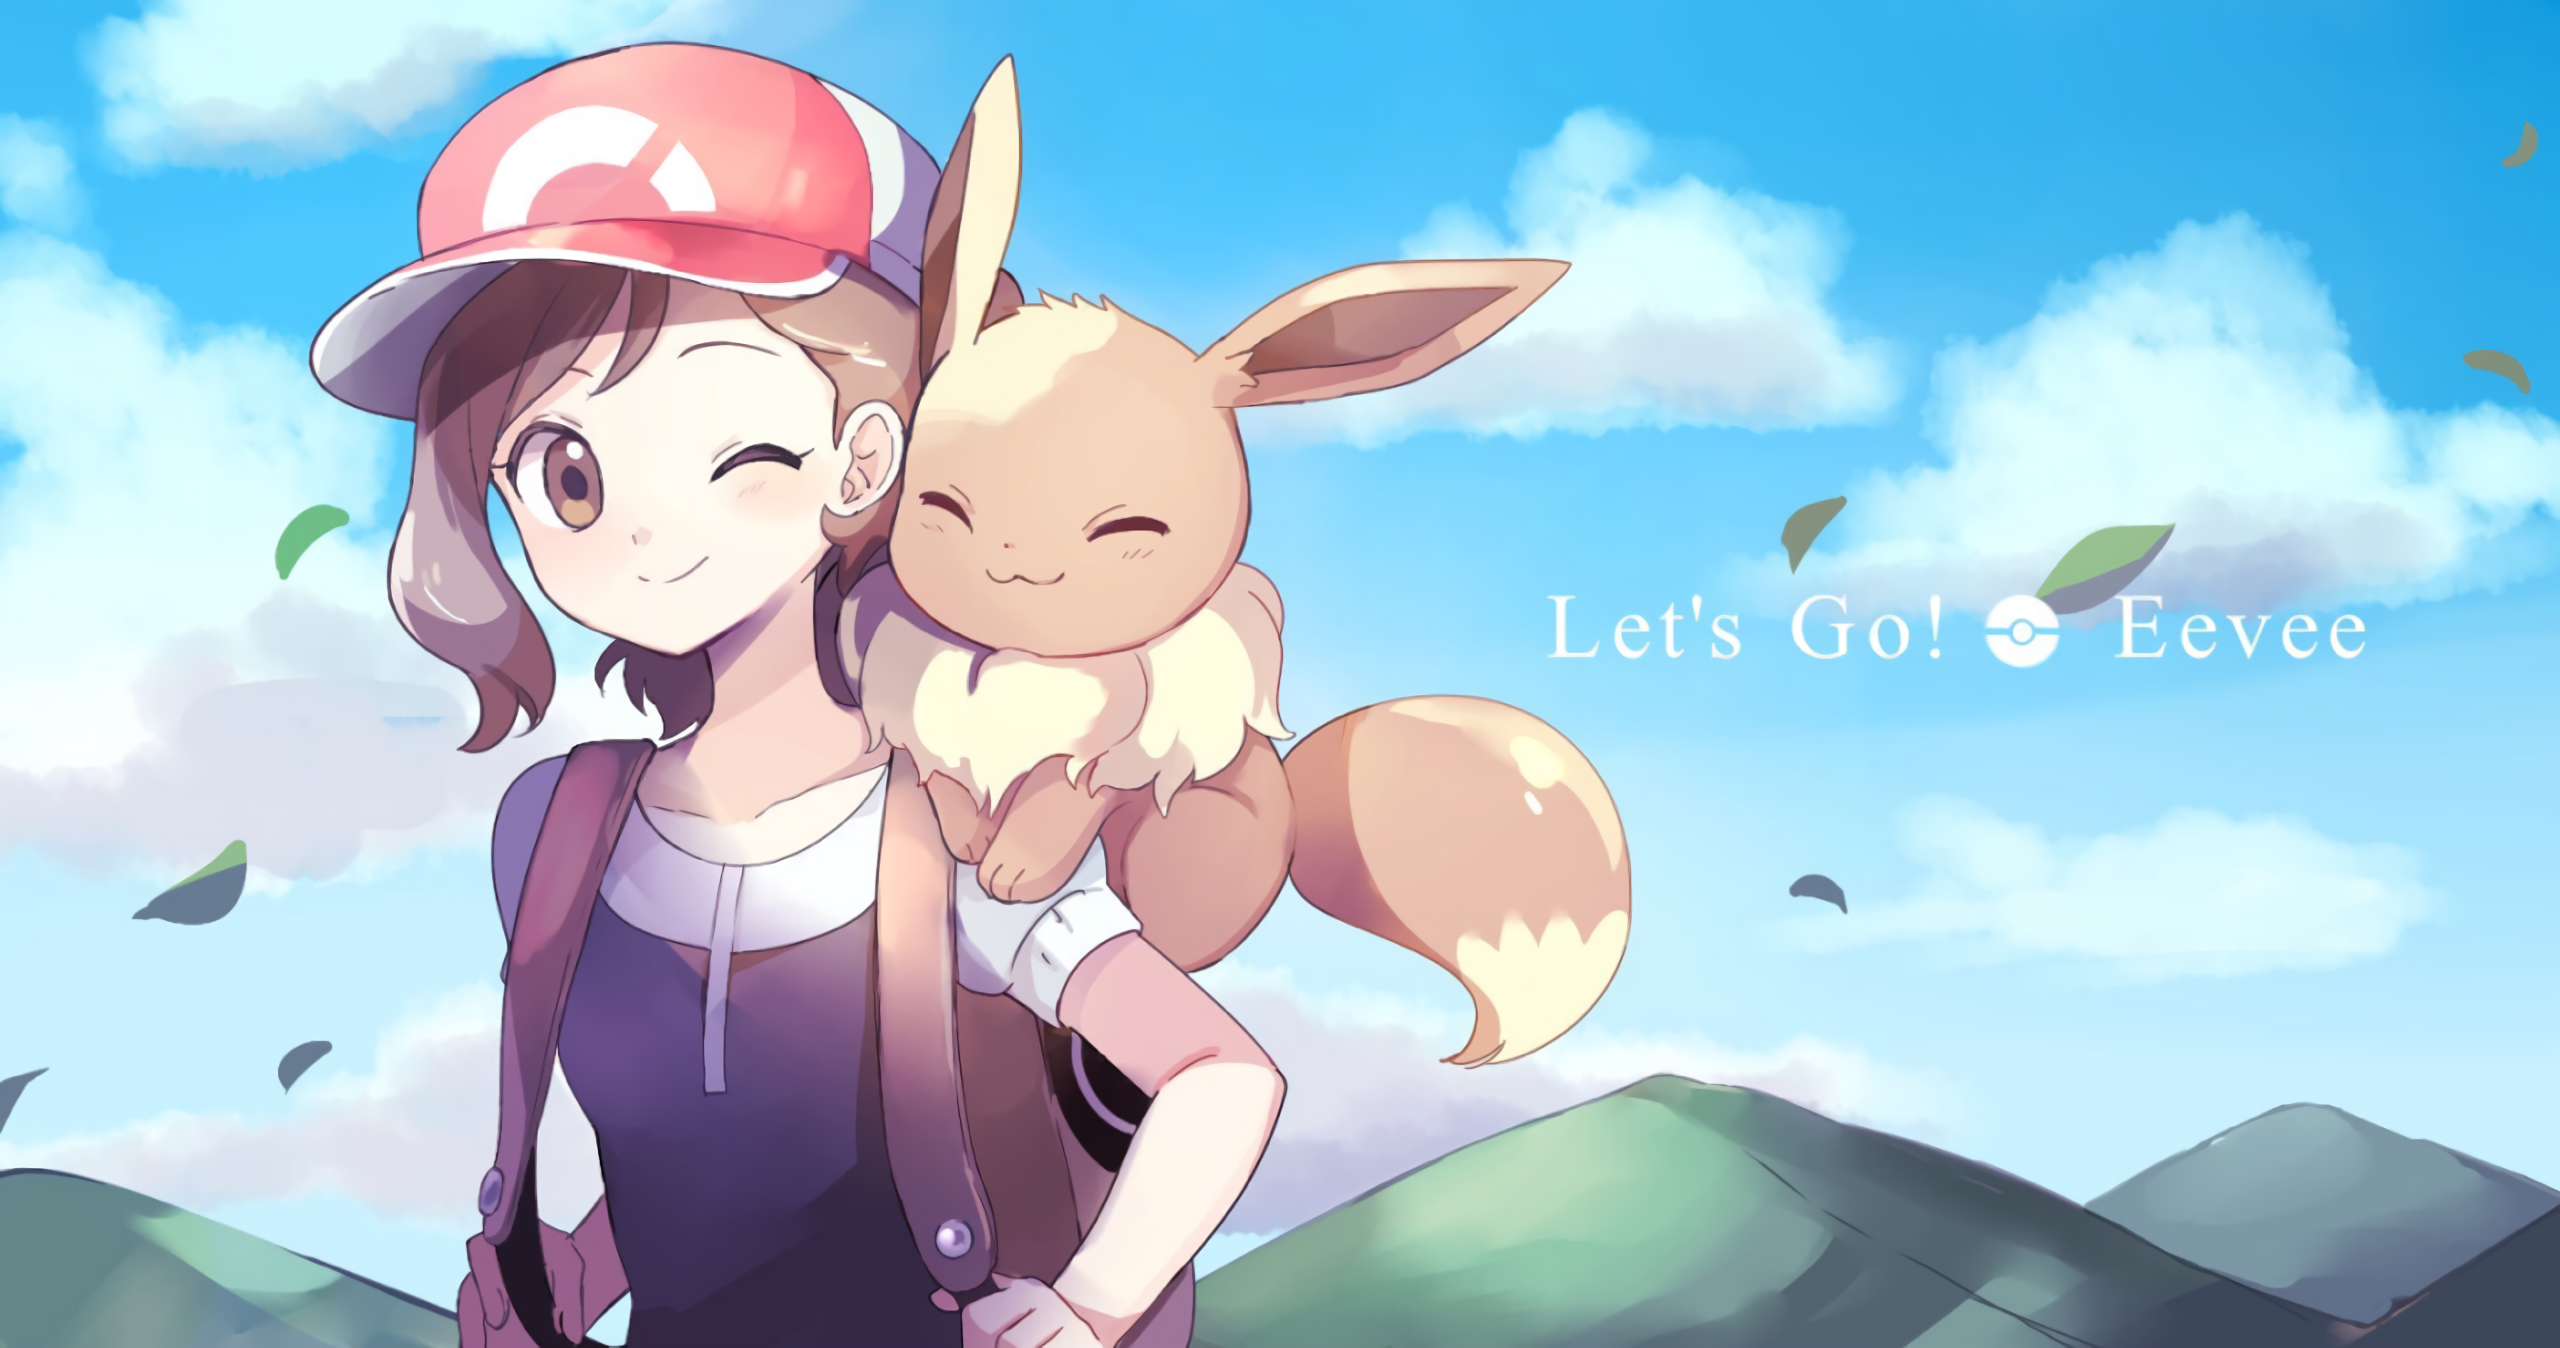 Video Game Pokémon: Let's Go Pikachu and Let's Go Eevee HD Wallpaper | Background Image